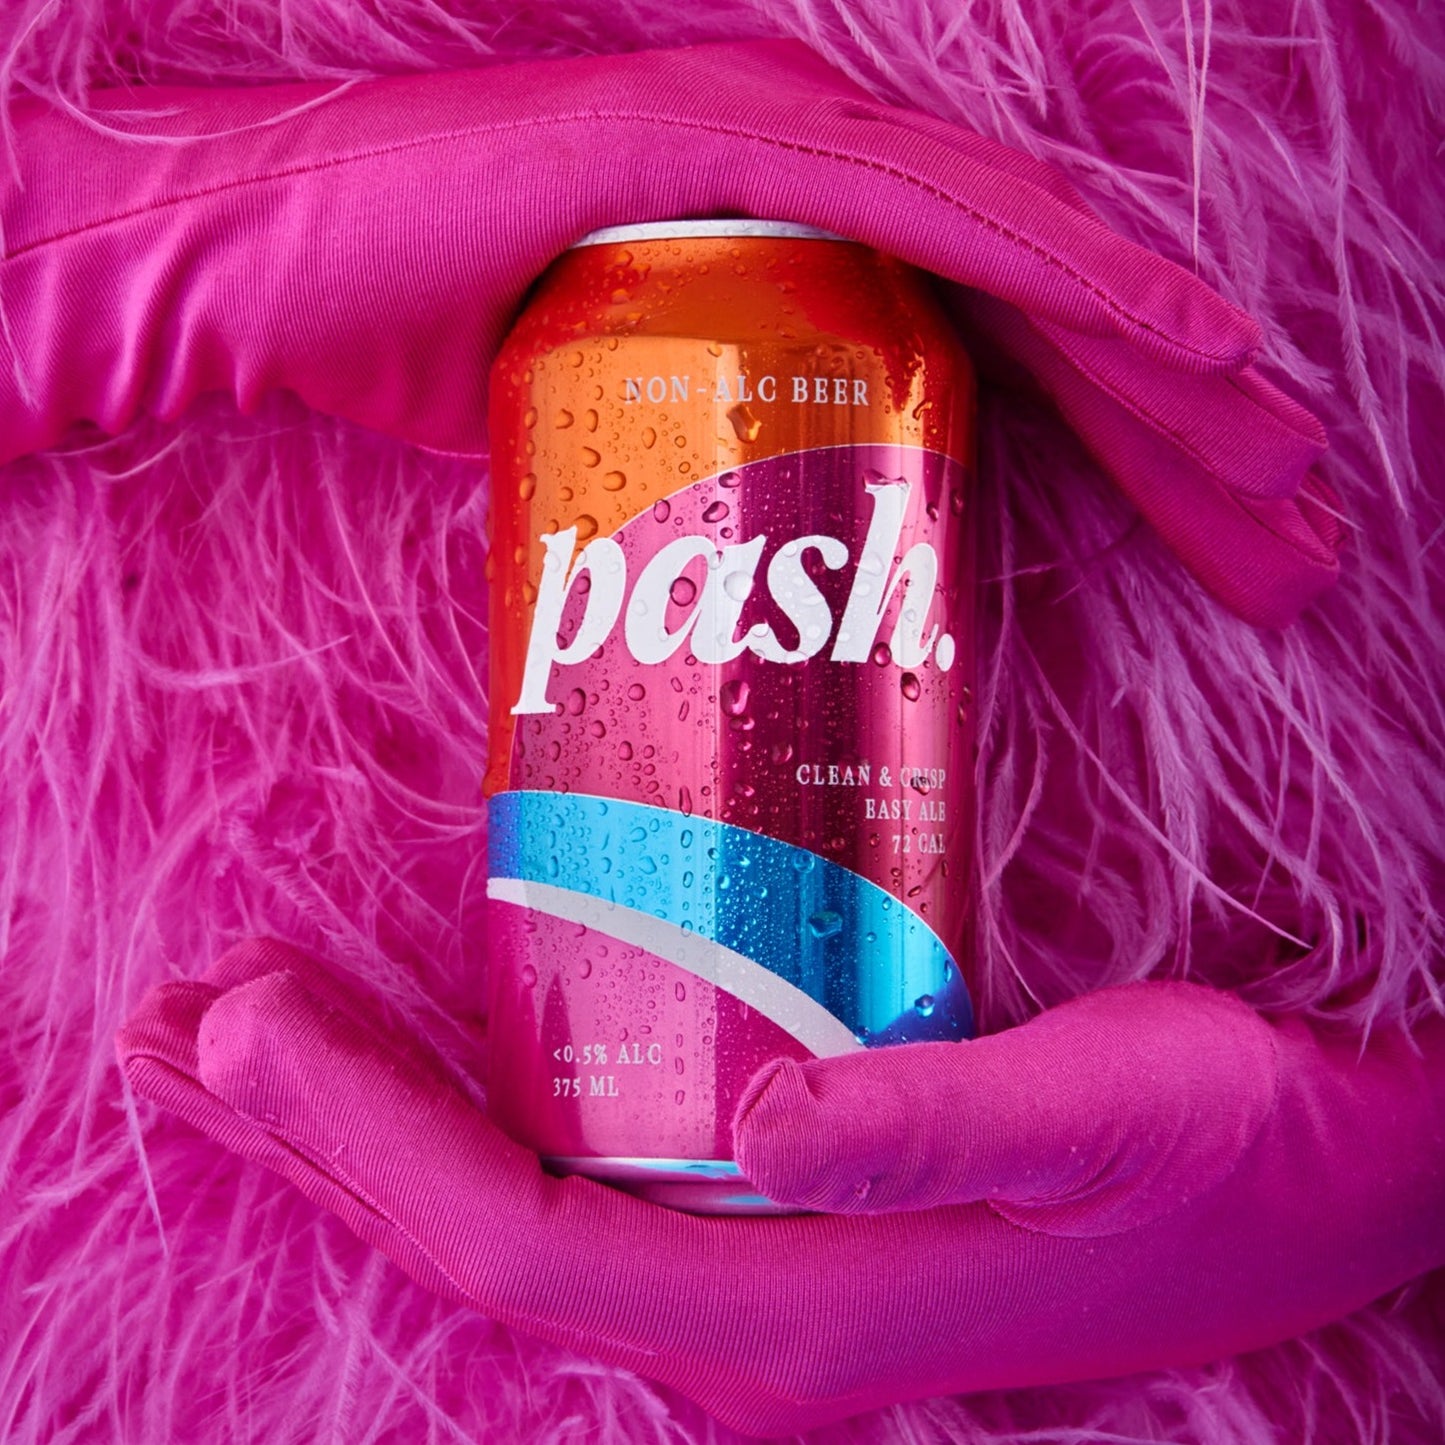 Pash. Easy Ale - Non-Alcoholic Beer